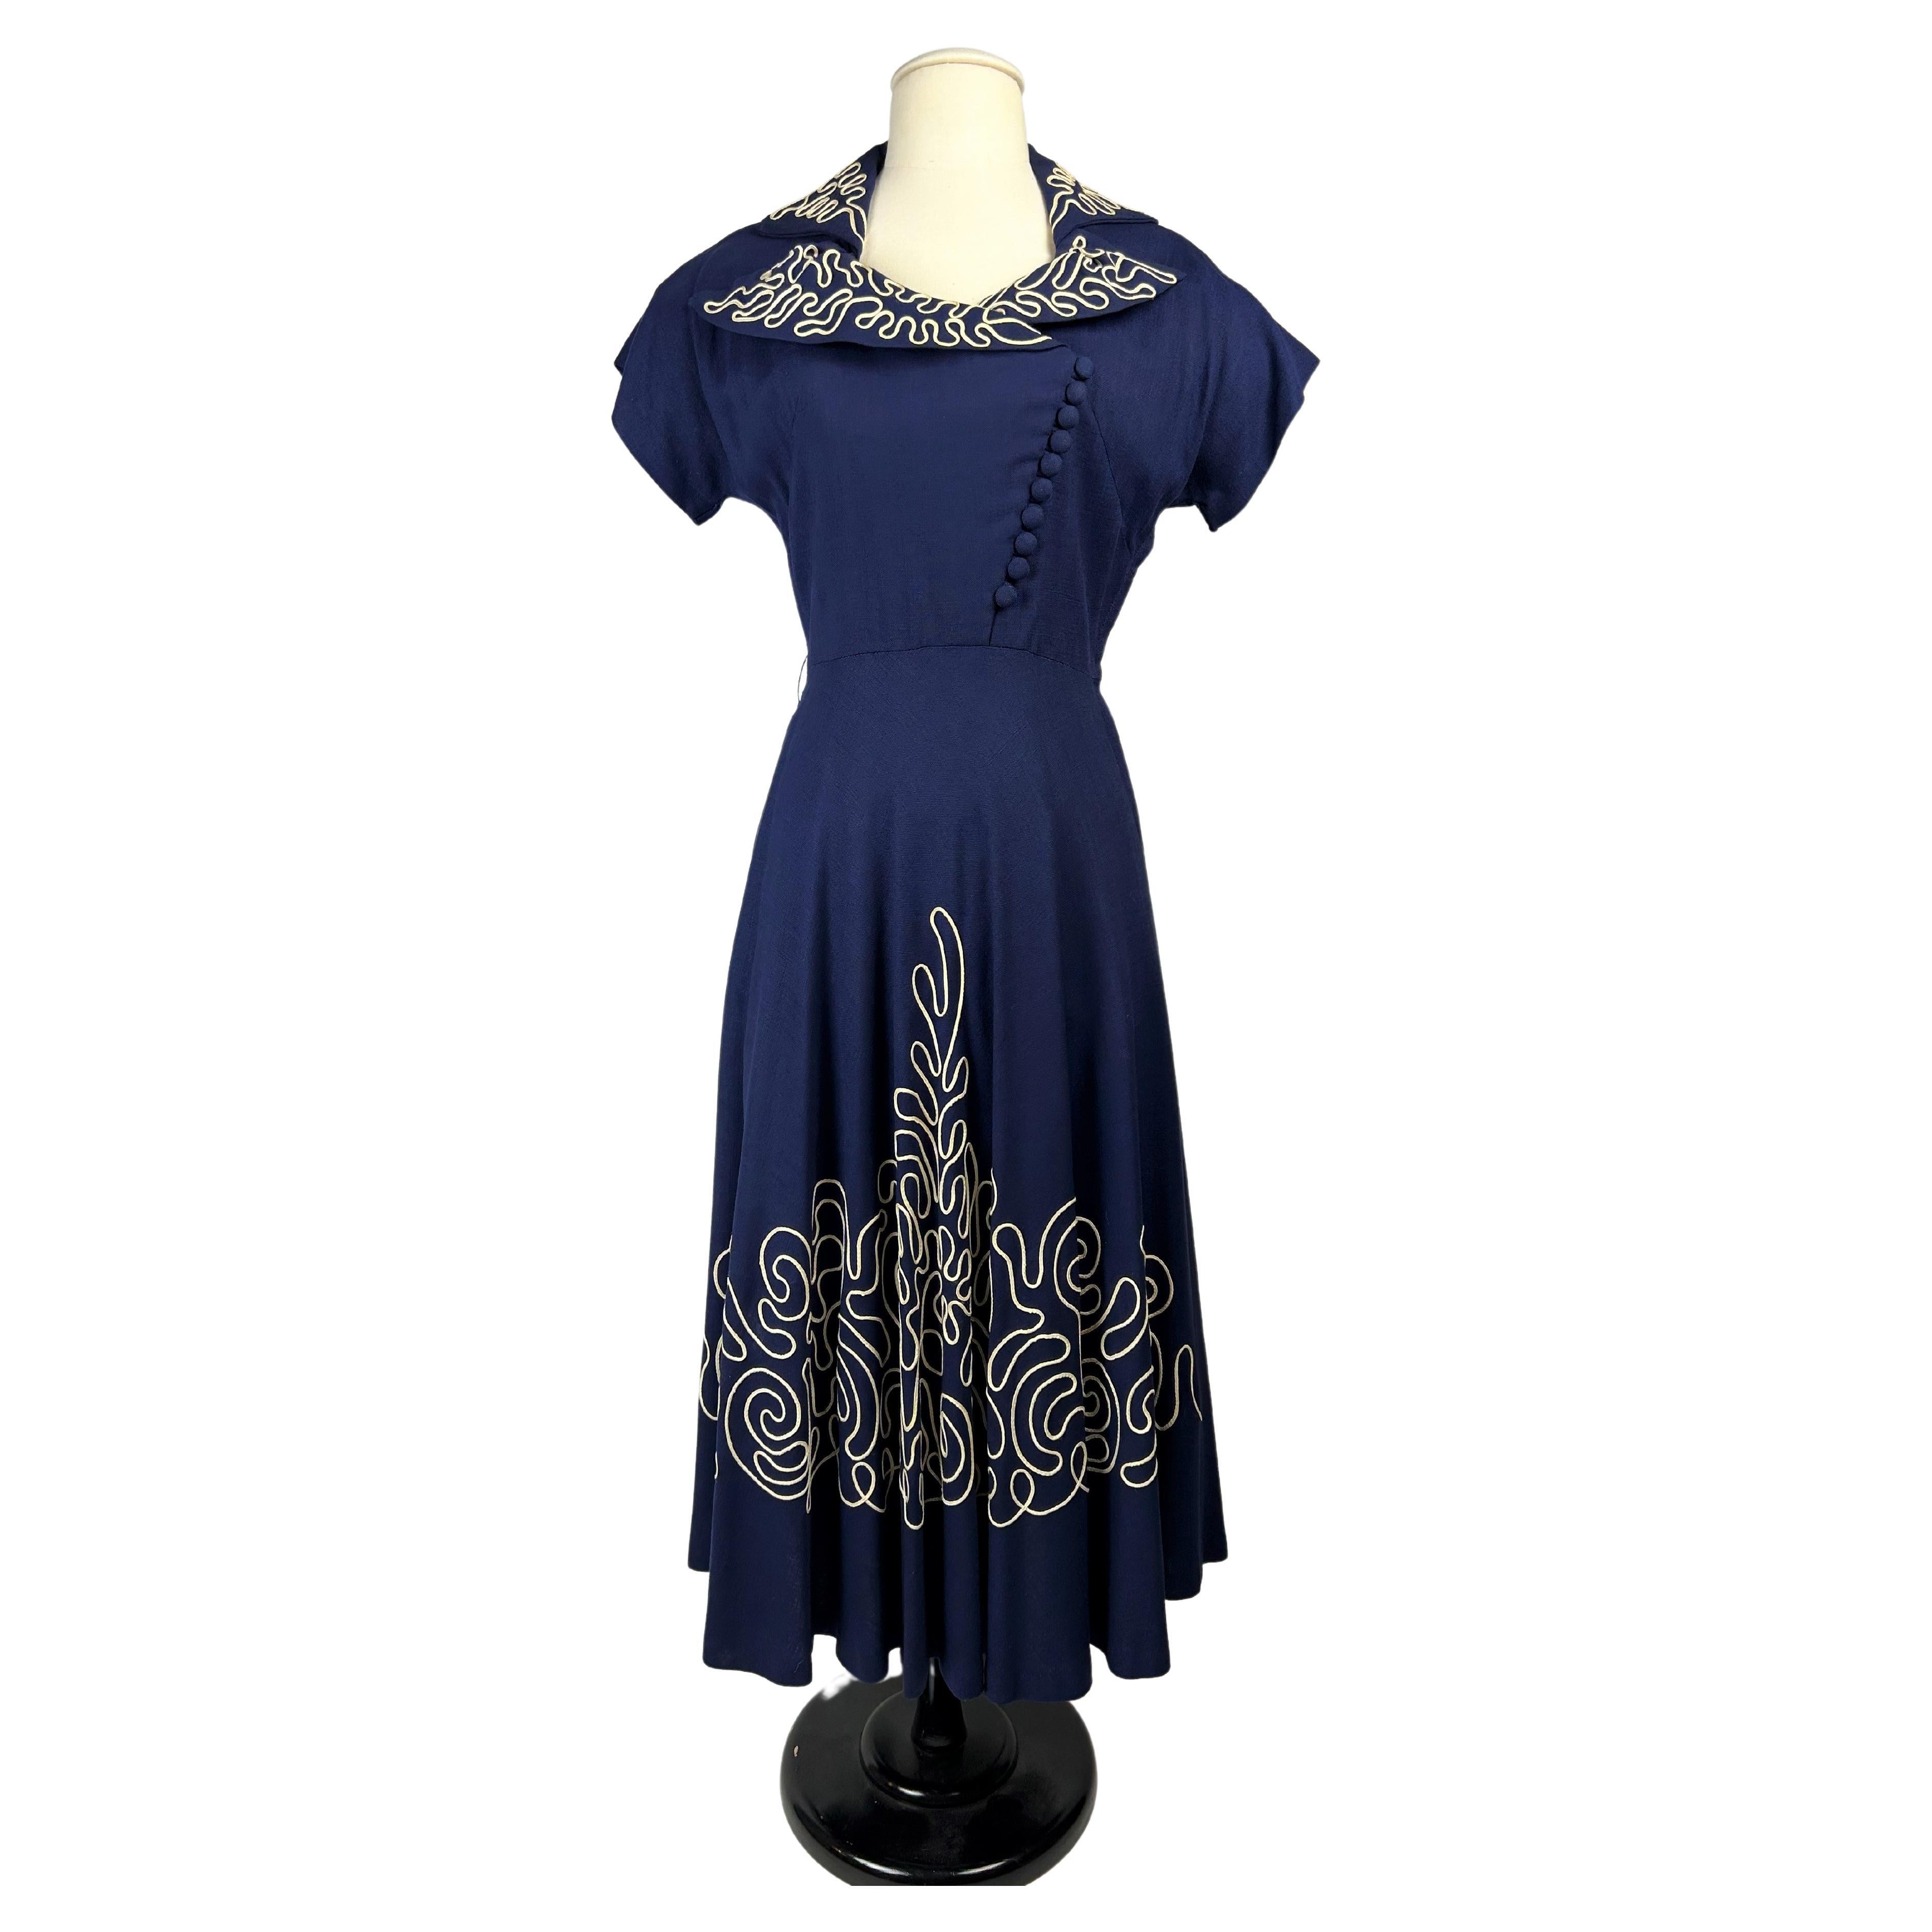 Circa 1945-1950
France
Marinière day dress in navy blue polyamide fabric inspired by the work of the Maison Henri à la Pensée and dating from the late 1940s. Bustier with asymmetrical buttoning, large collar with folded-over points and small raglan